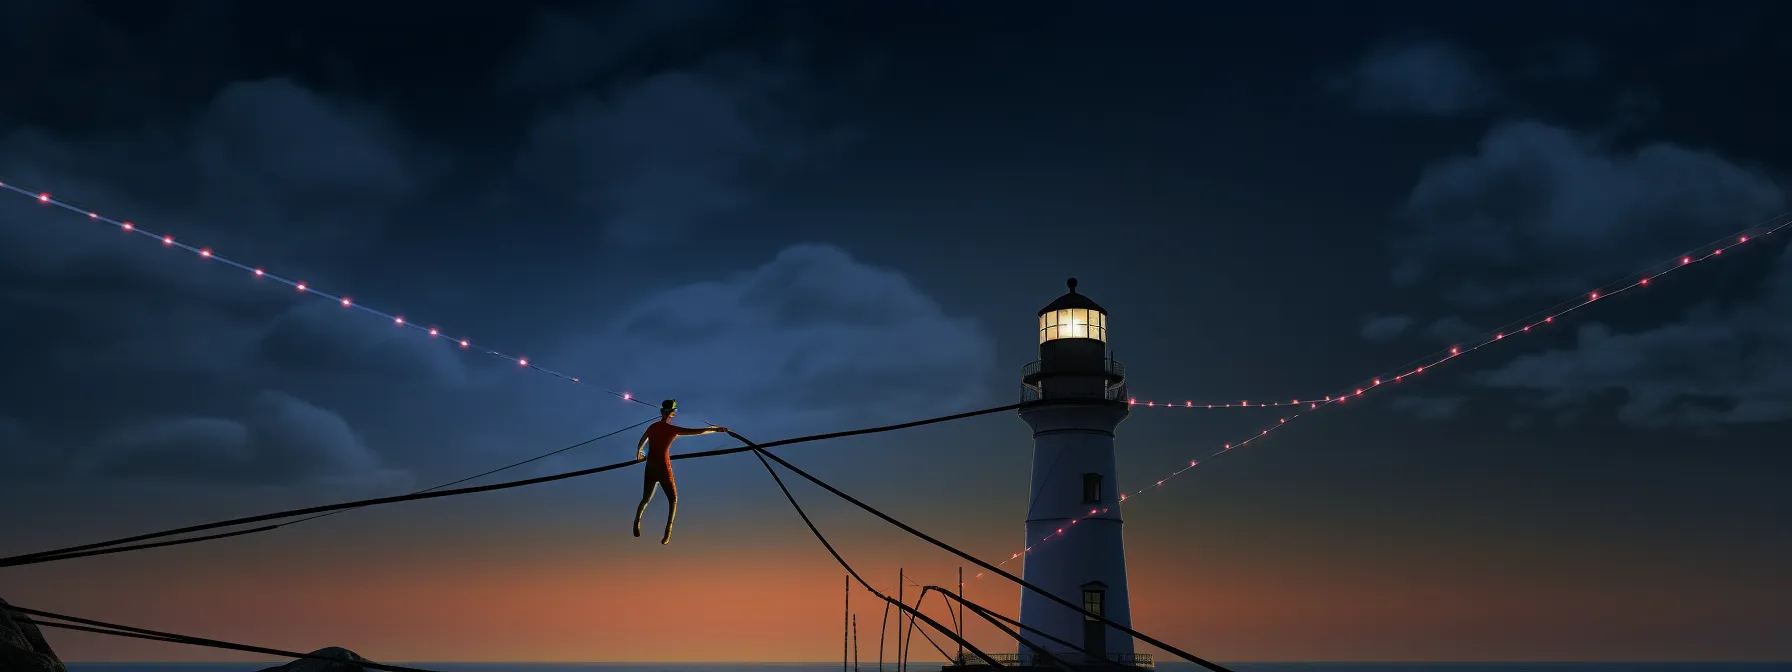 A Tightrope Walker Performing On A Virtual Web Tightrope, With A Circus-Like Atmosphere Surrounding Them And A Lighthouse In The Background.